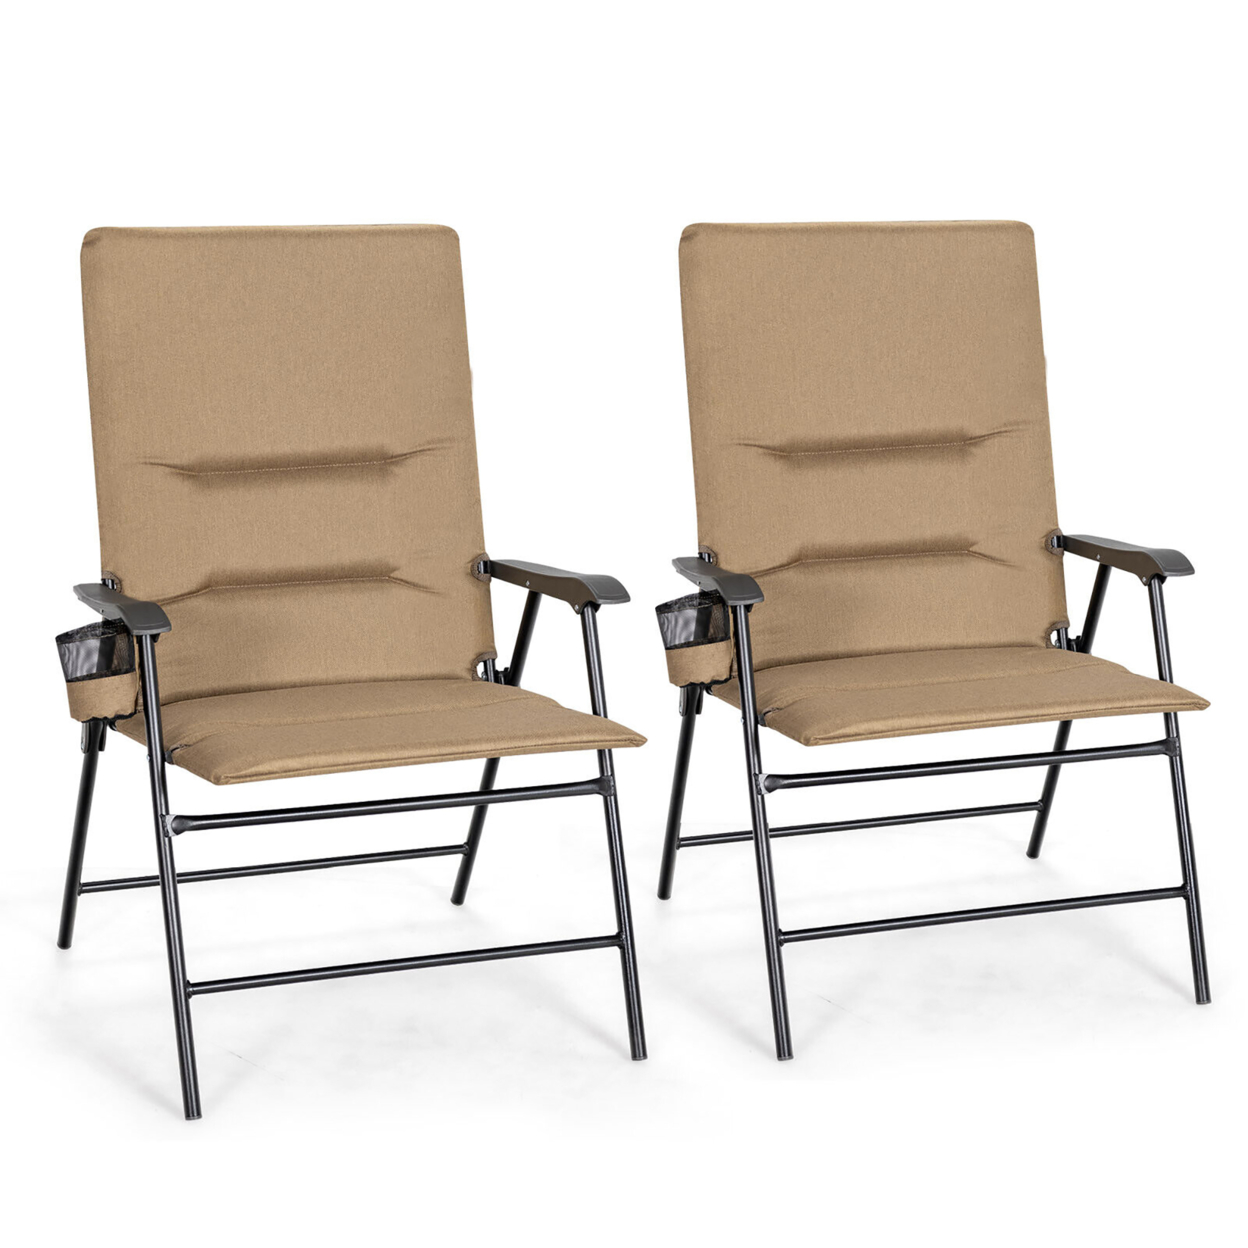 Set Of 2 Patio Camping Dining Chair Portable Padded Folding Chair Outdoor - Brown